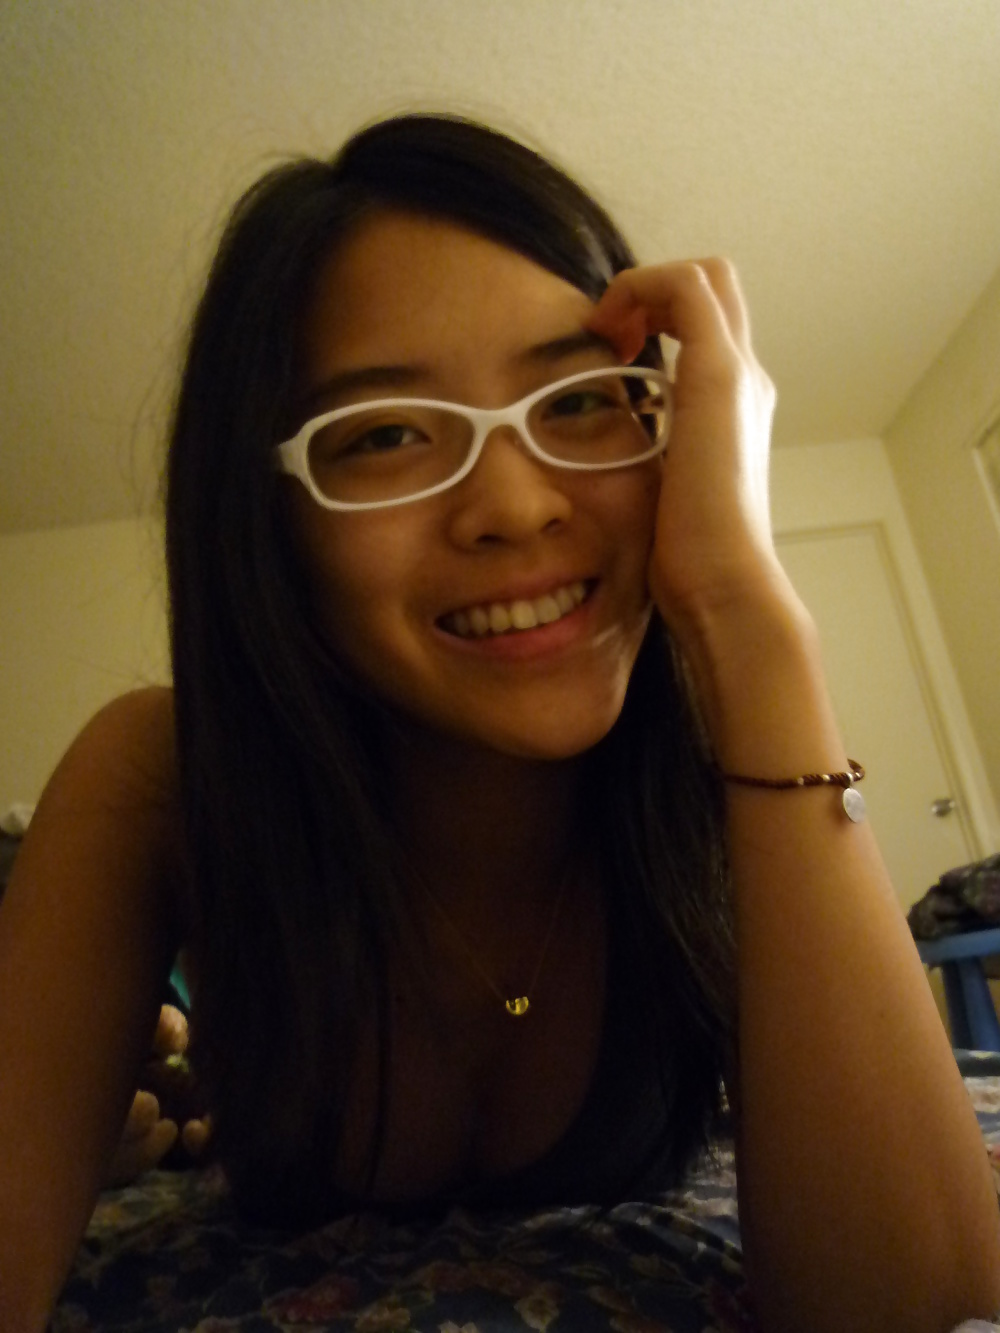 Sexy asian teen with glasses #30188323